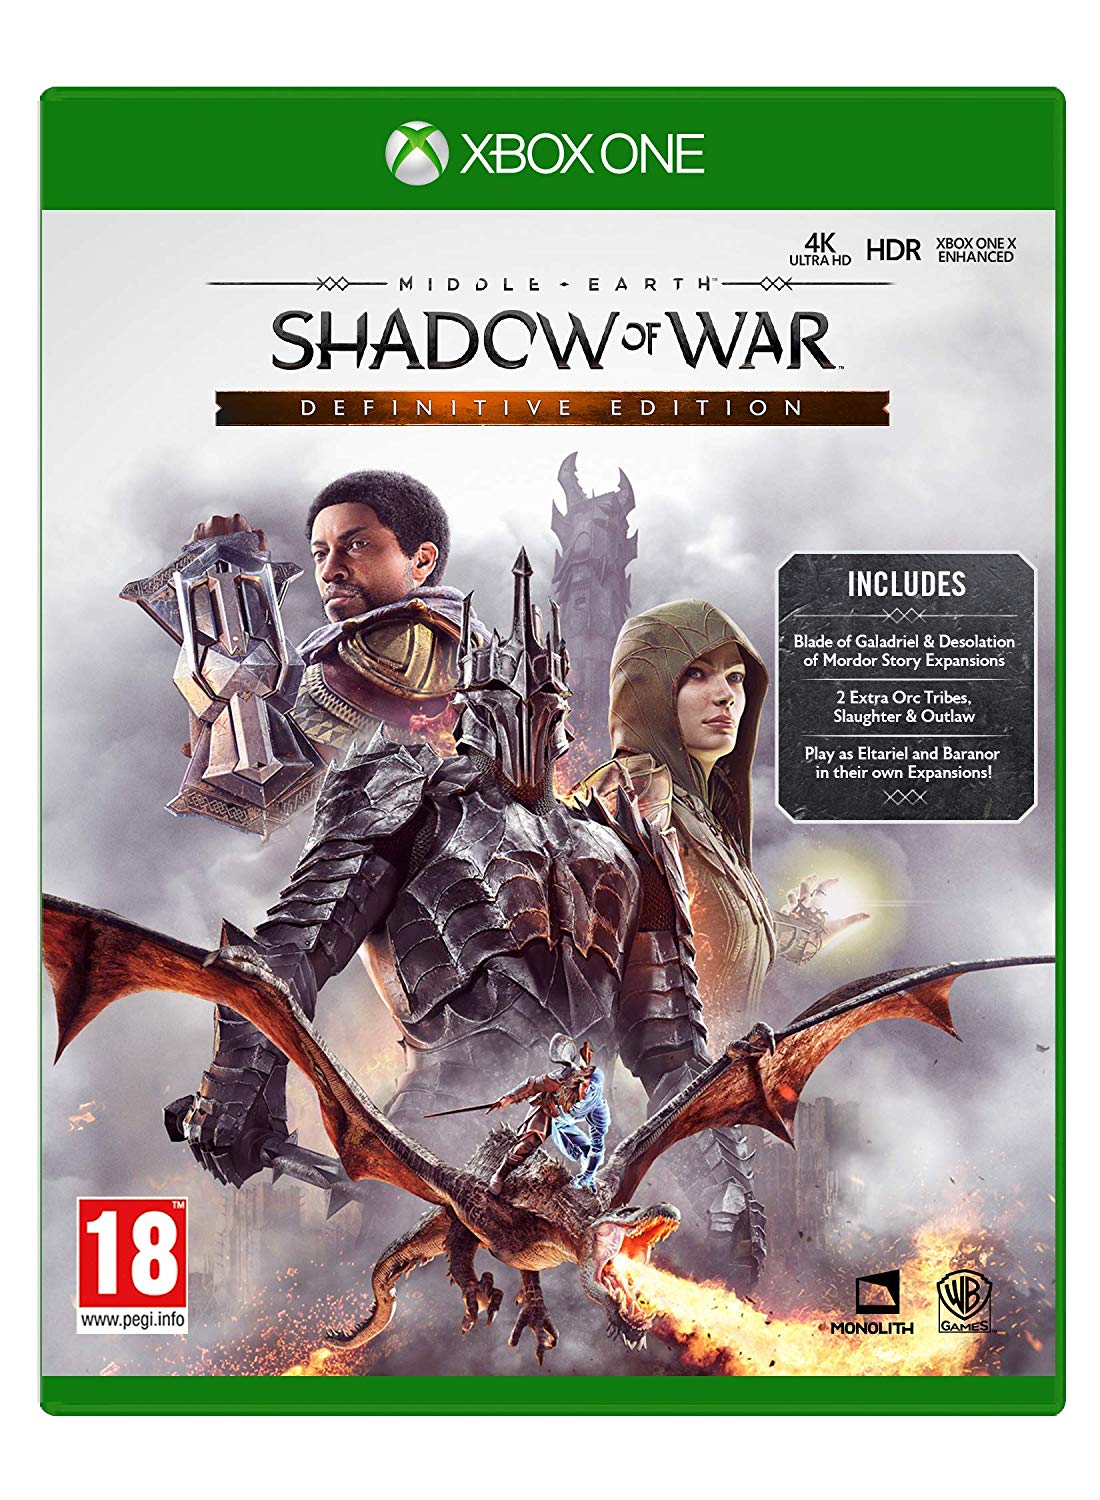 Middle Earth: Shadow of War Definitive Edition (Xbox One) - Offer Games